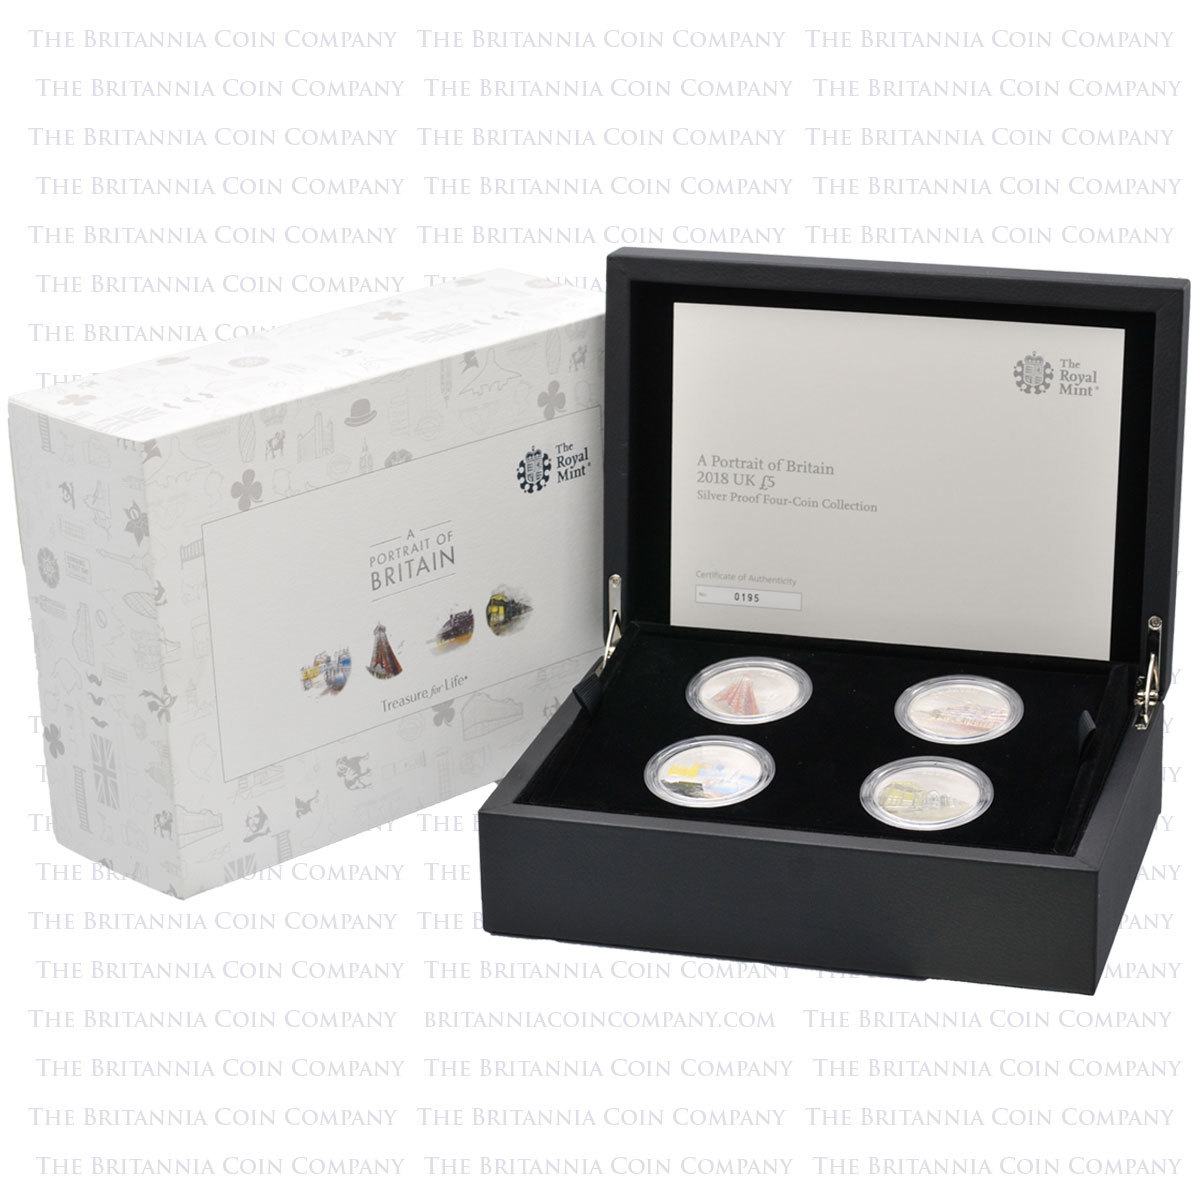 UK18POBS 2018 Portrait Of Britain £5 Crown Silver Proof Set Boxed